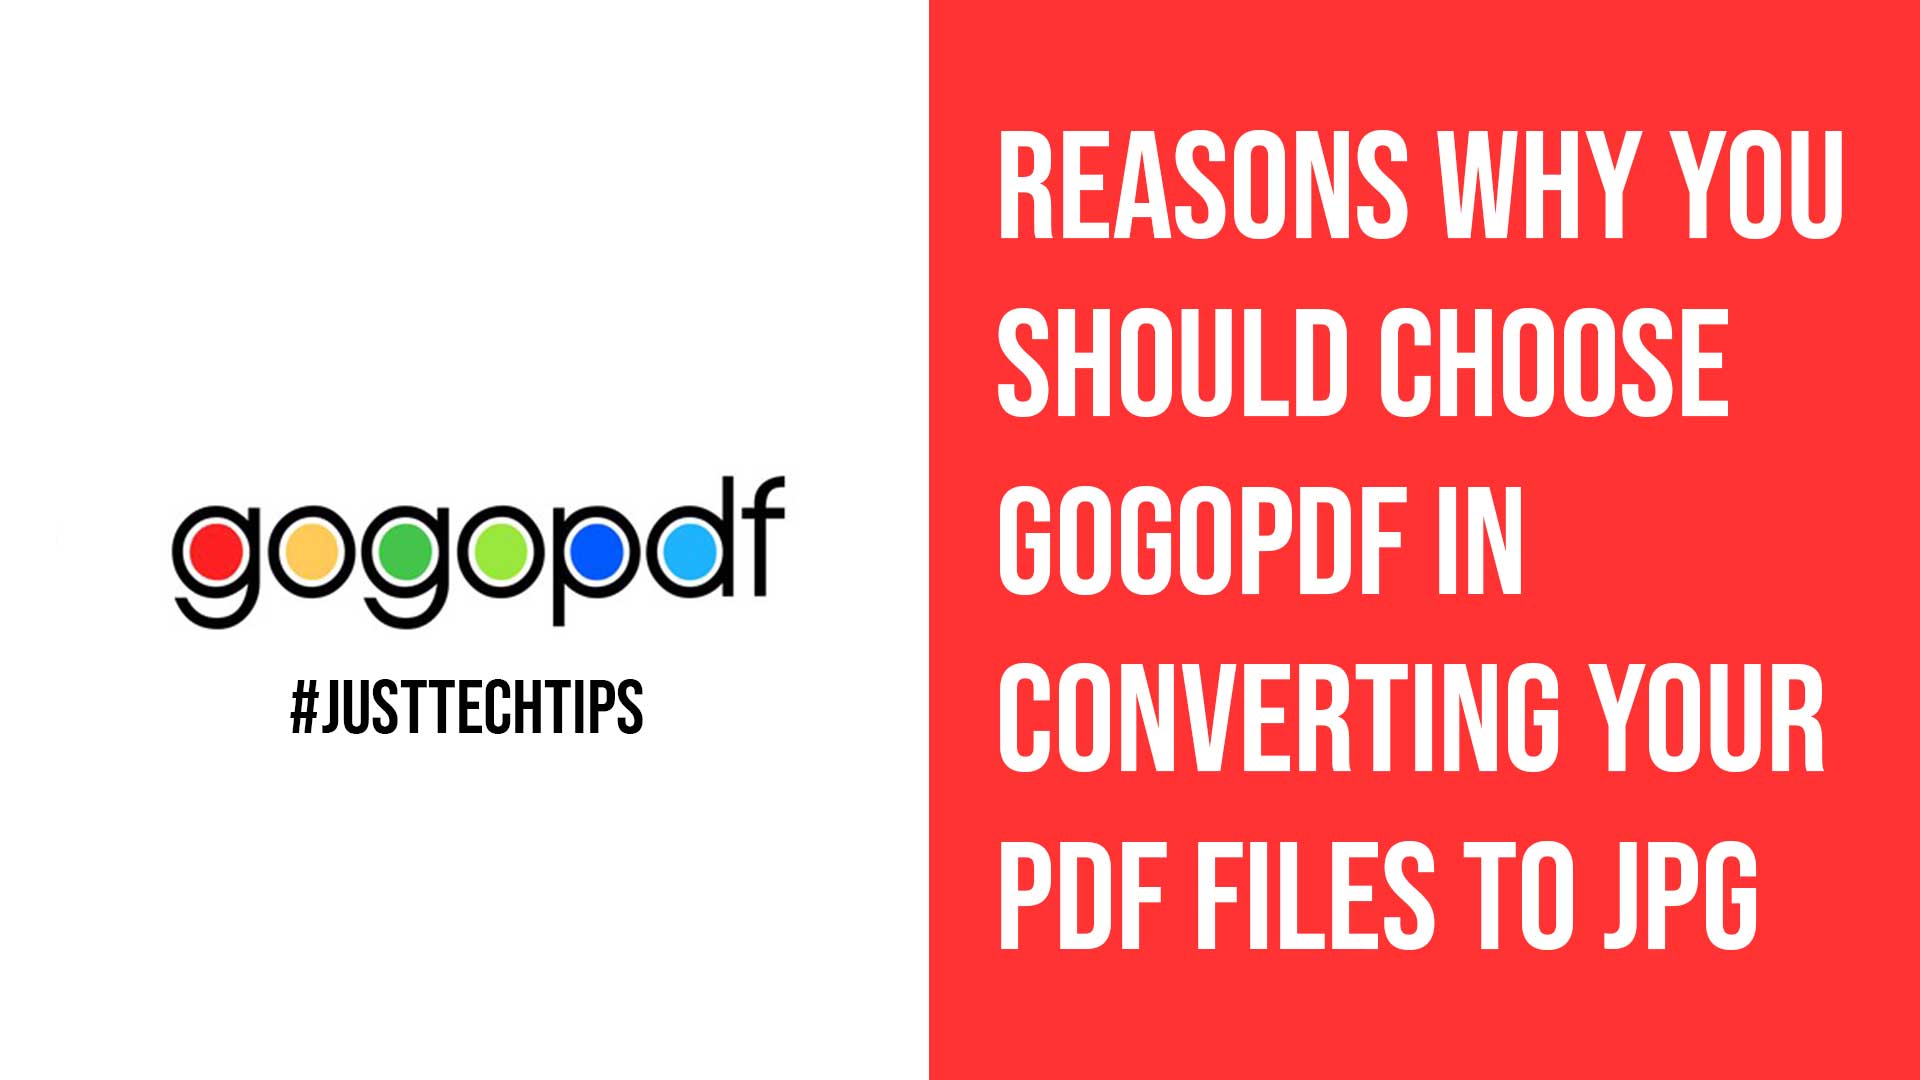 Reasons Why You Should Choose GoGoPDF in Converting Your PDF Files to JPG